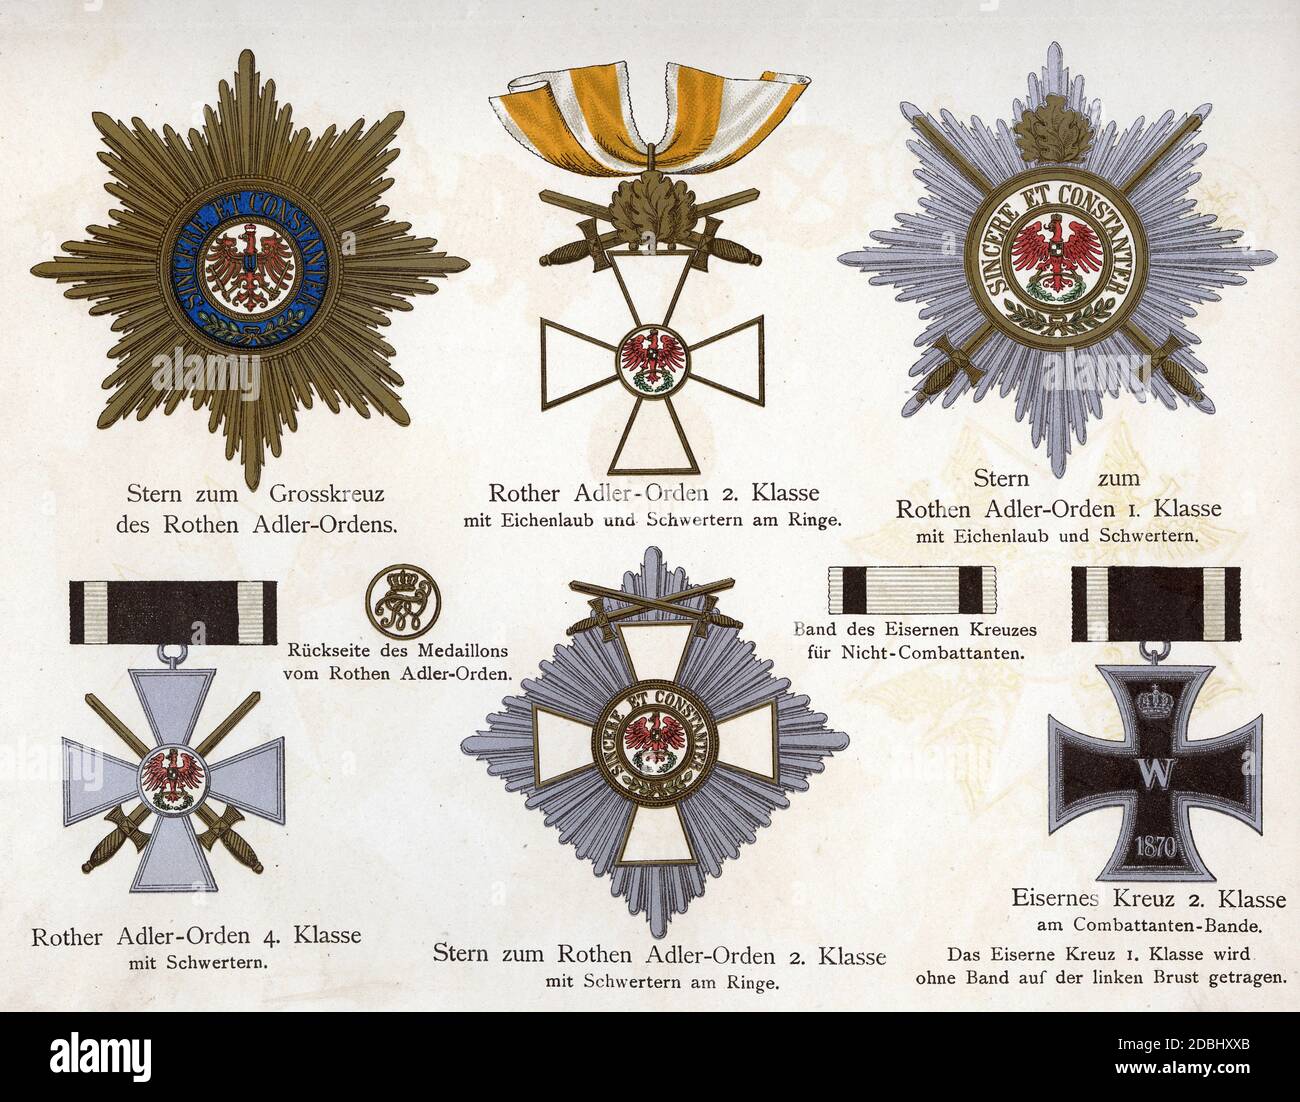 'Prussian orders and decorations: Star of the Grand Cross of the Order of the Red Eagle (motto ''Sincere et Constanter''), Order of the Red Eagle 2nd class with oak leaves and swords on the ring, Star of the Order of the Red Eagle 1st class with oak leaves and swords, Order of the Red Eagle 4th class with swords, reverse of the medallion of the Order of the Red Eagle, Star of the Order of the Red Eagle 2nd Class with swords on the ring, ribbon of the Iron Cross for Non-Combatants, Iron Cross 2nd Class on the Combatants' Ribbon (motto ''Sincere et Constanter'') and the Iron Cross 1st Class Stock Photo